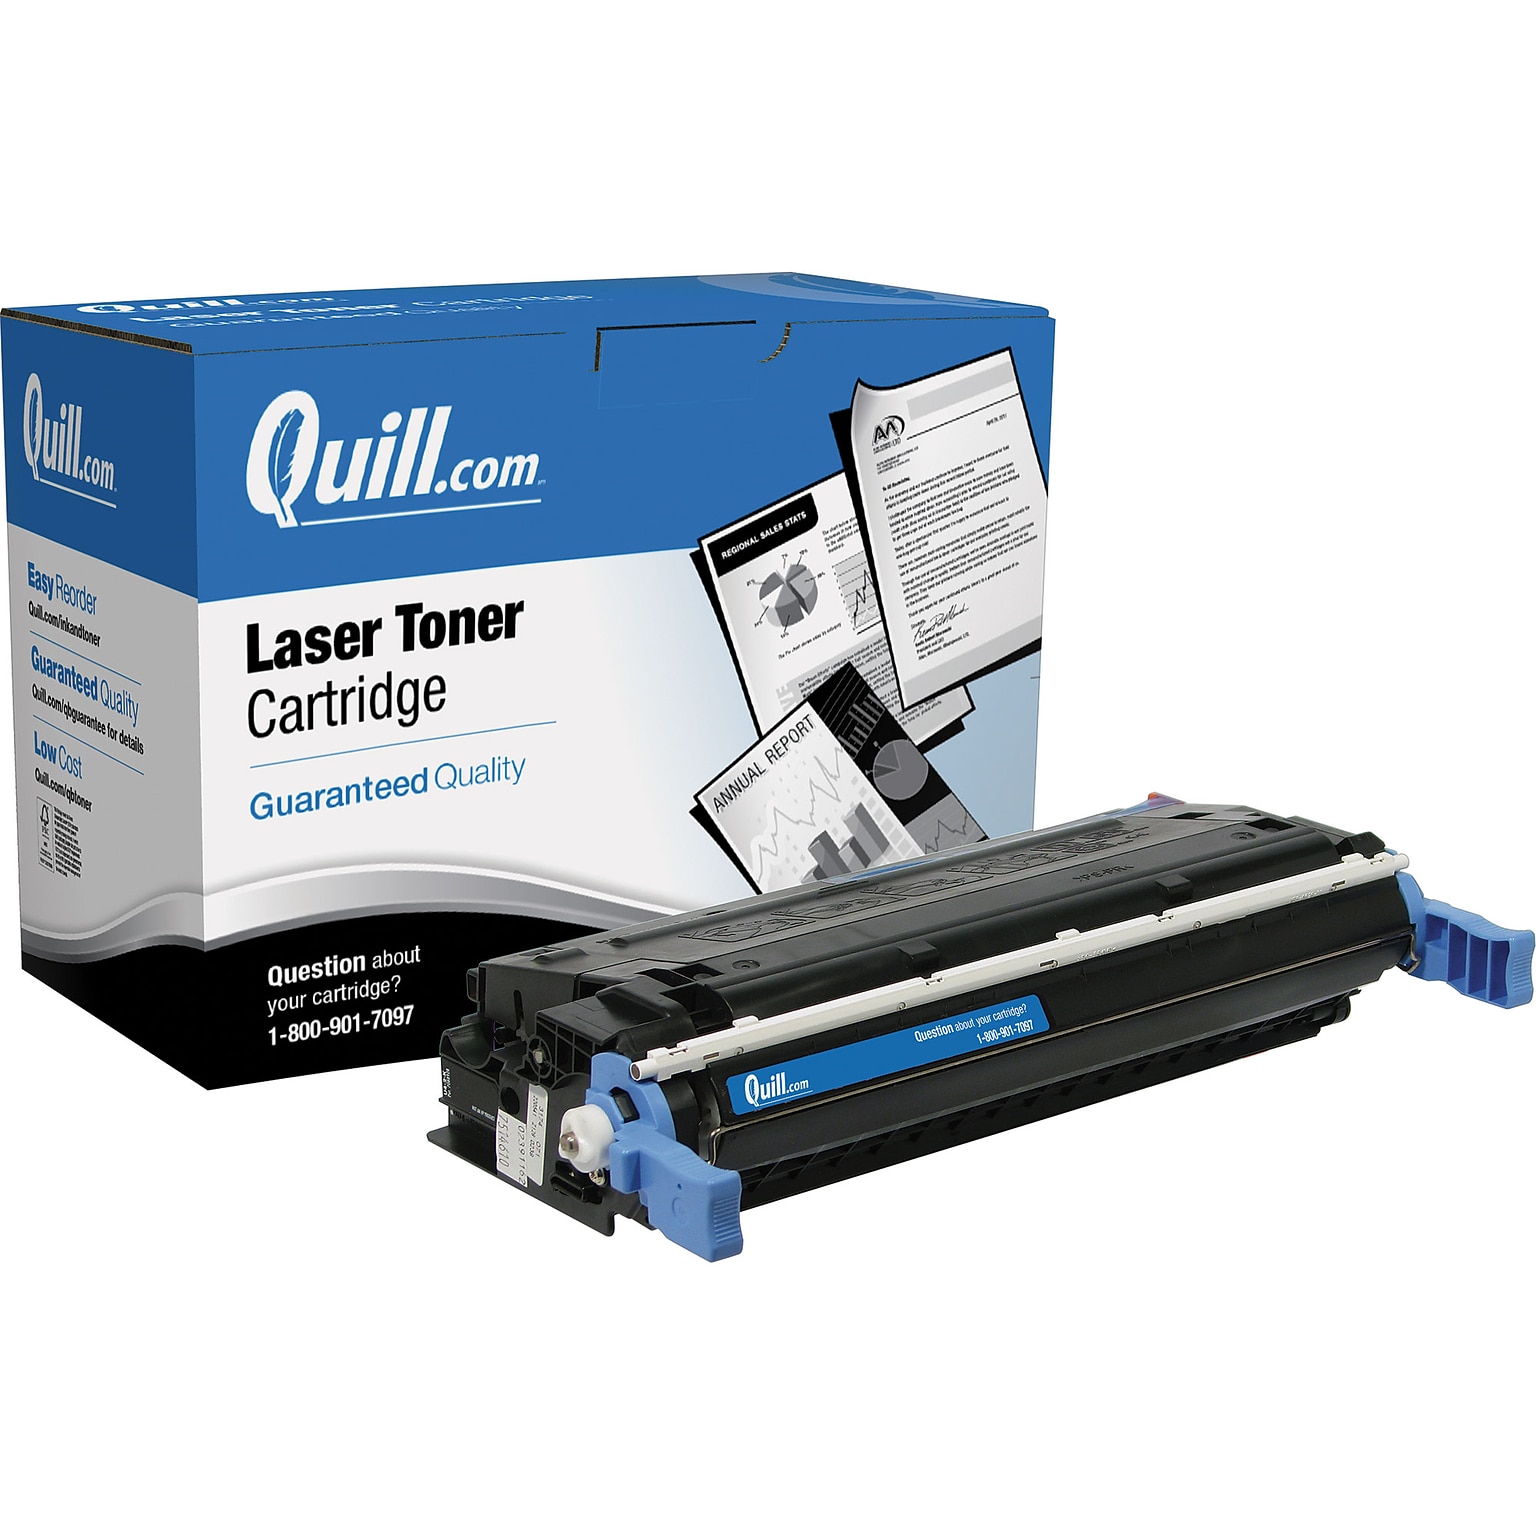 Quill Brand Remanufactured HP 641A (C9720A) Black LaserJet Toner Cartridge (100% Satisfaction Guaranteed)